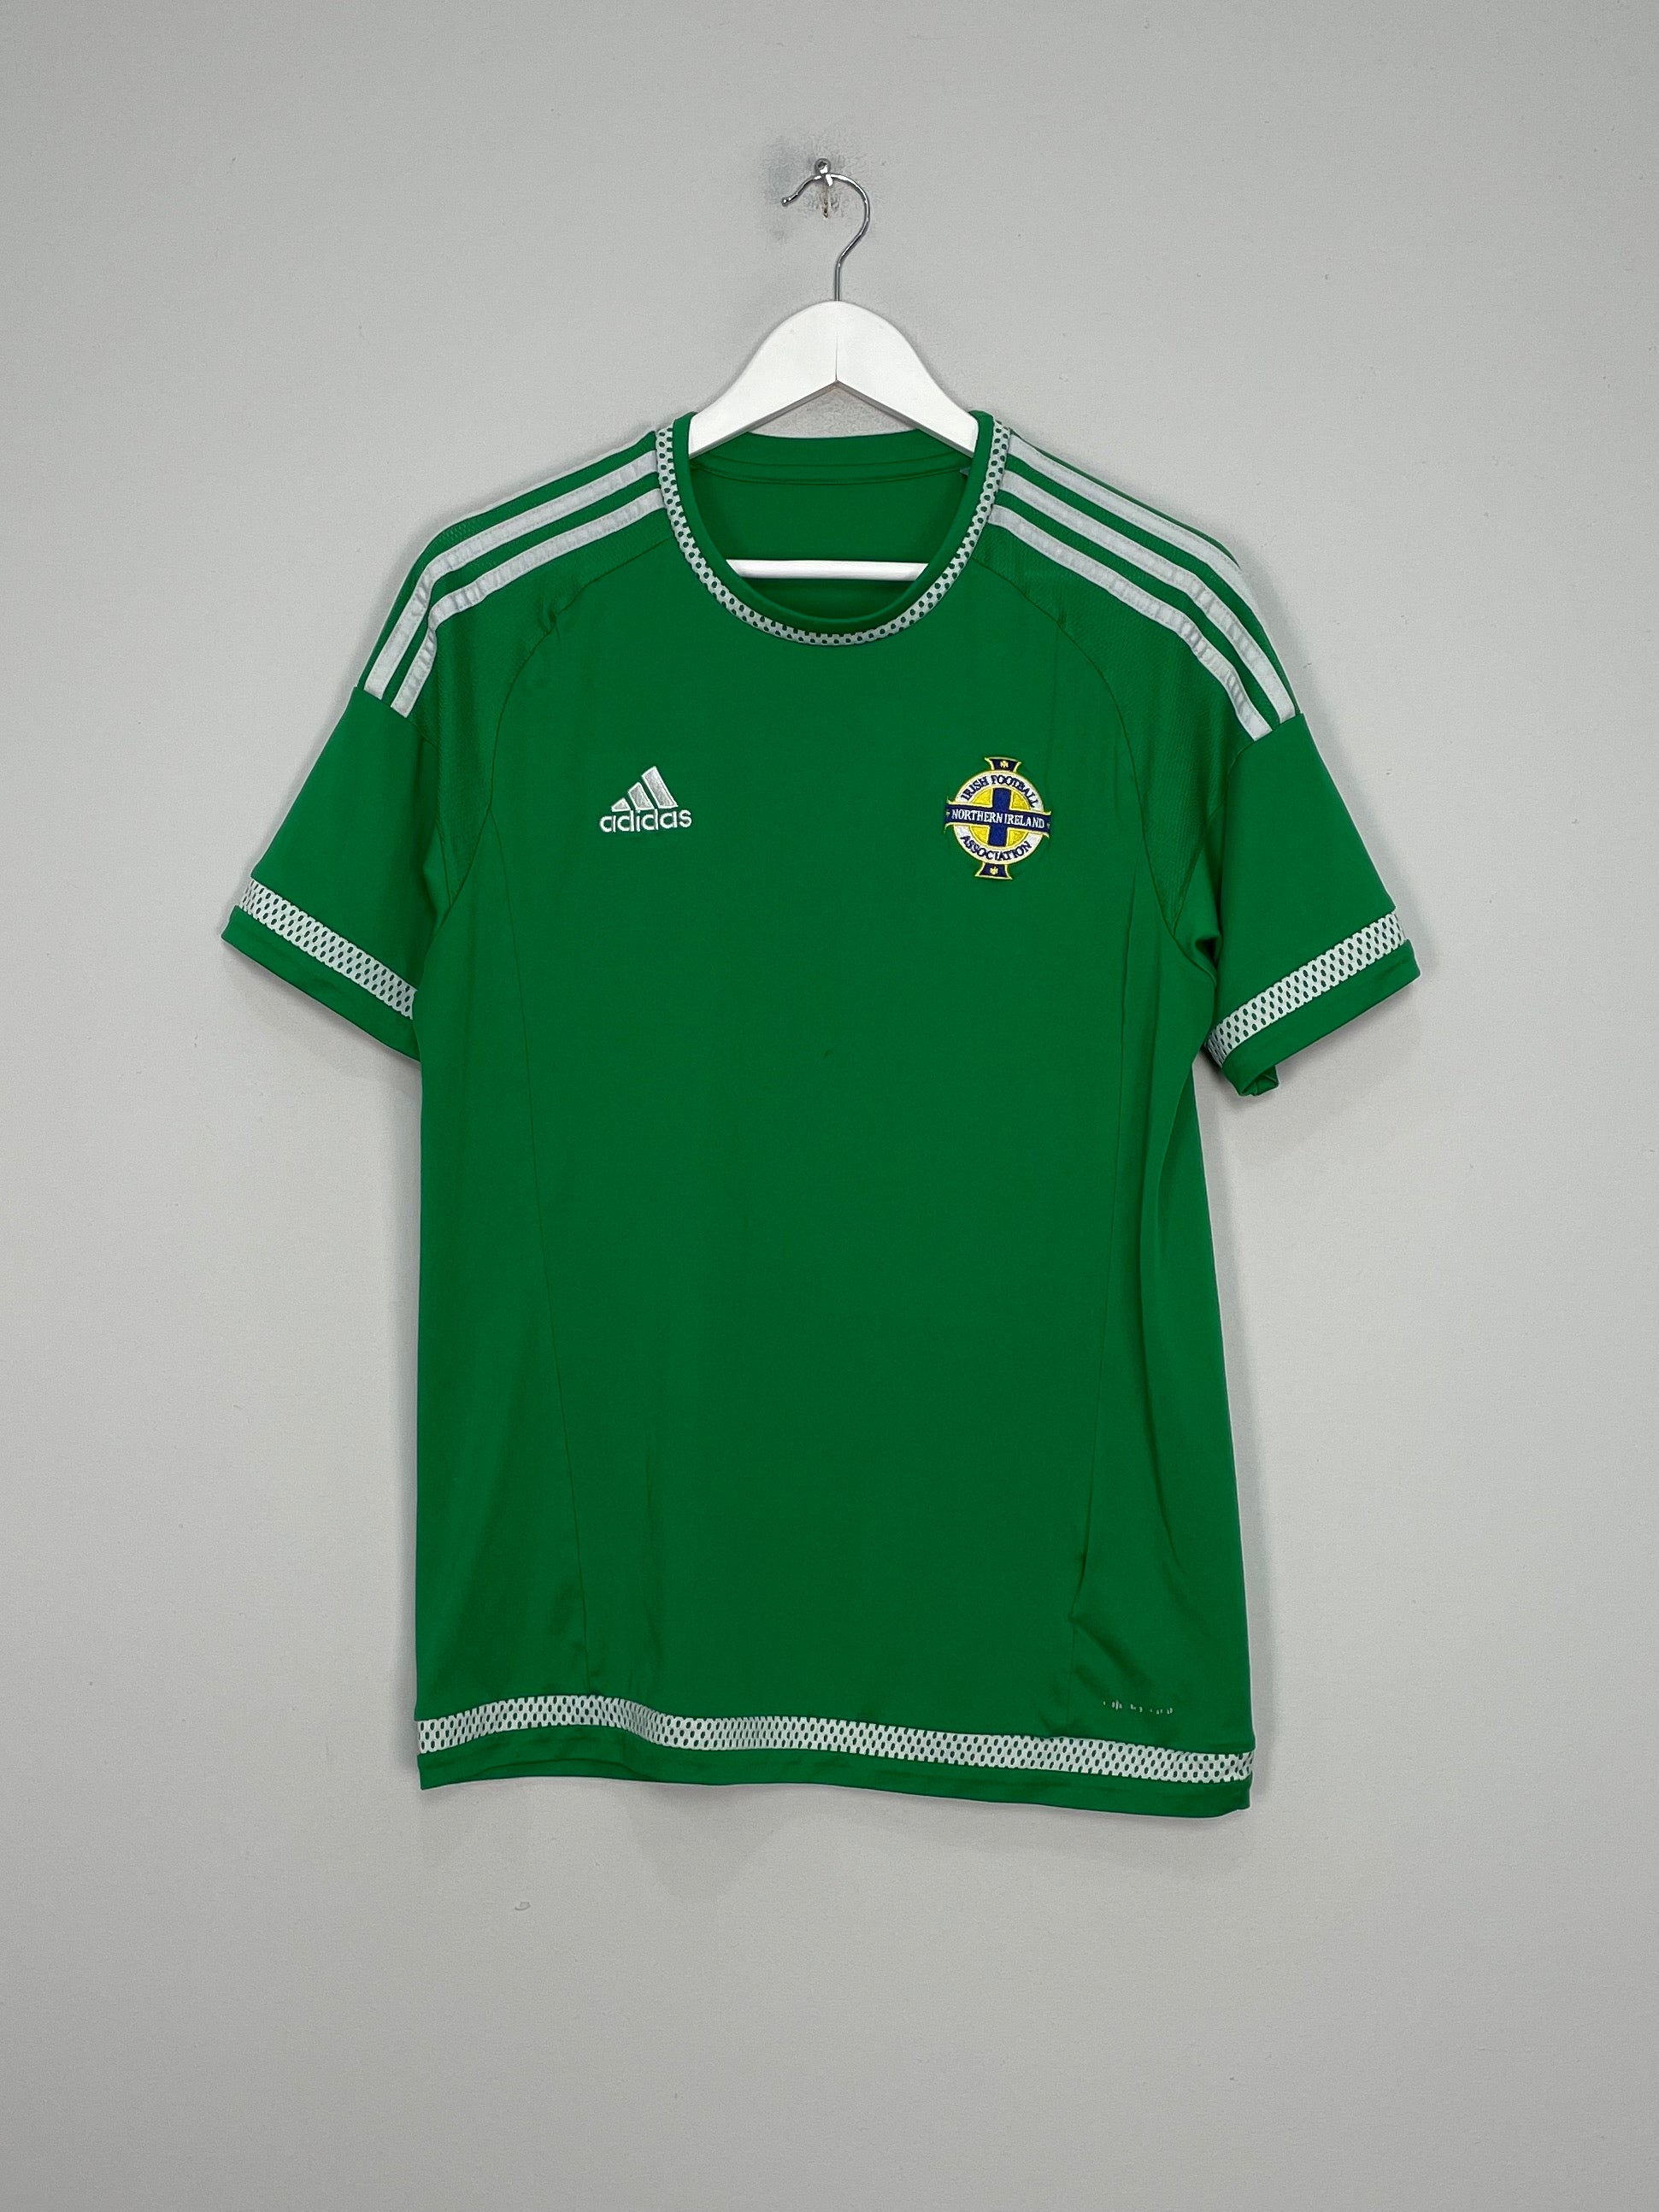 Image of the Northern Ireland shirt from the 2015/16 season